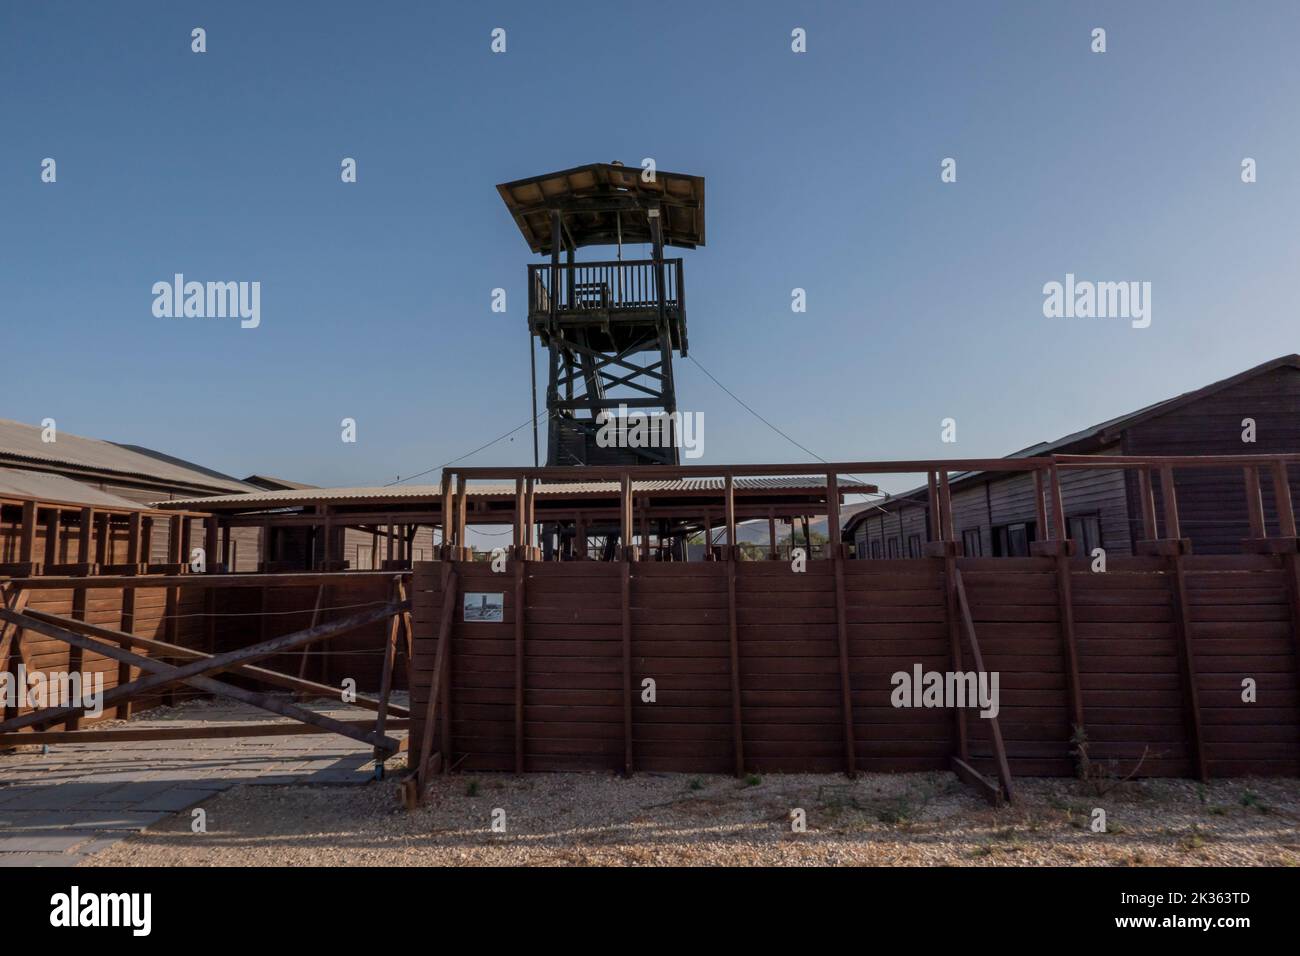 Life size reconstruction structure of Tel Amal, one of the first 'Tower and Stockade' settlements set up by Jewish pioneers during the 1936-39 Arab Revolt located in Gan HaShlosha National Park also known by its Arabic name Sakhne in Israel Stock Photo